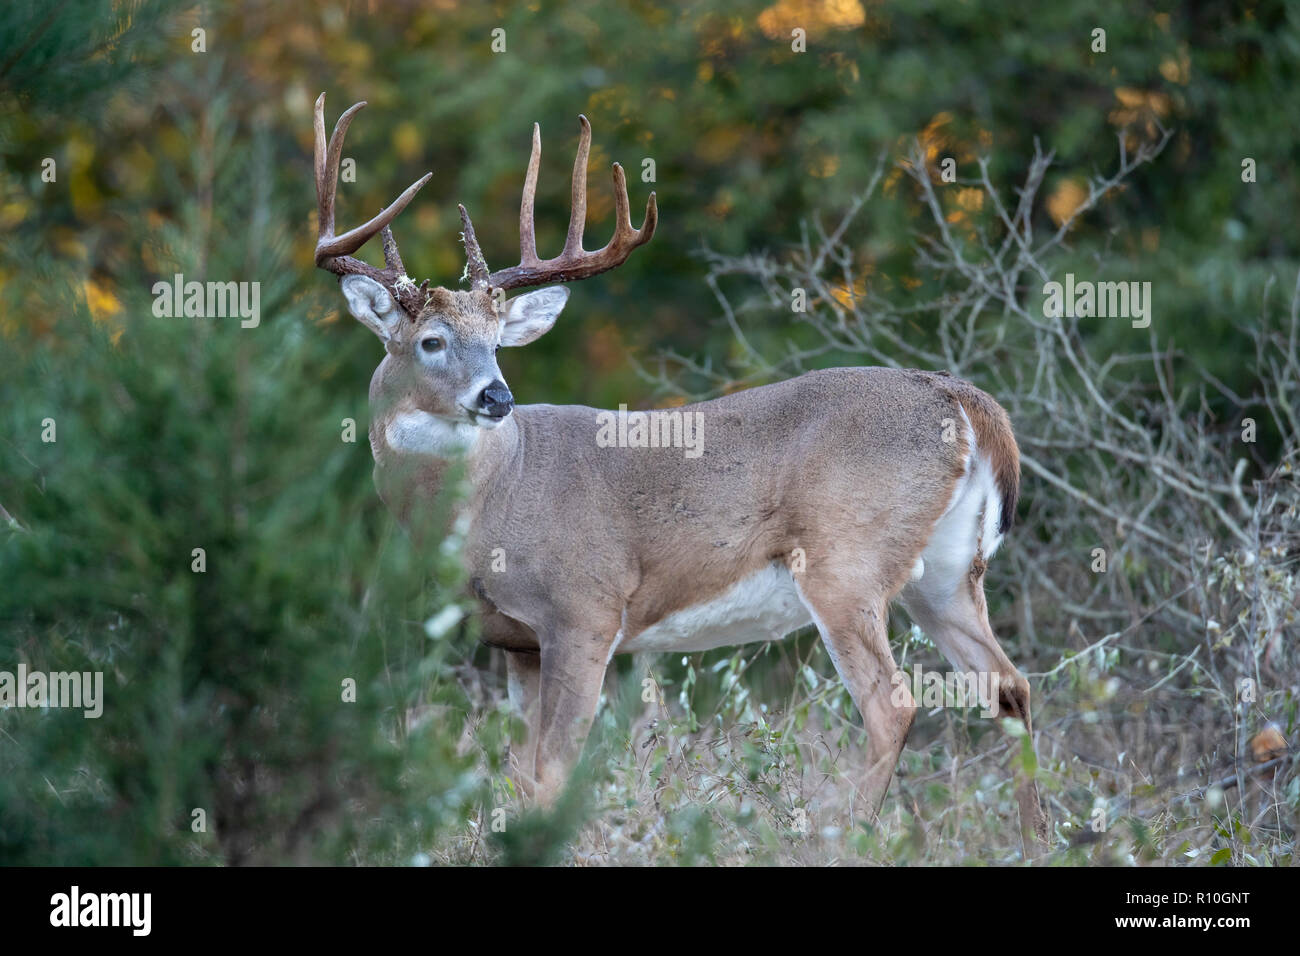 An alert, mature buck whitetail deer with big antlers standing at the edge of a forest. Stock Photo